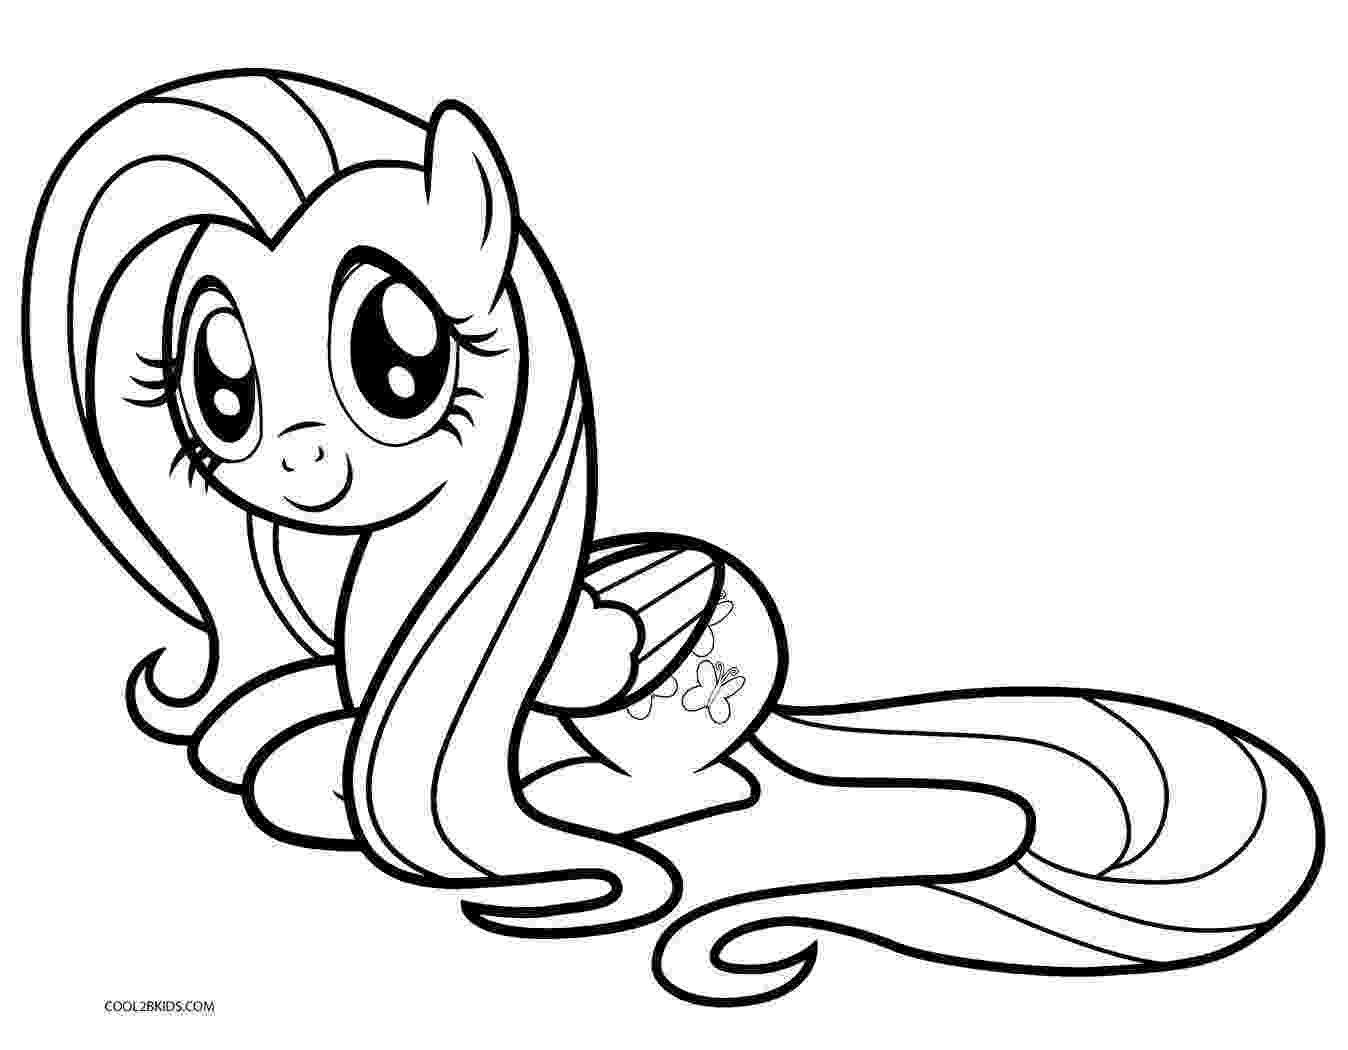 coloring pages of my little pony my little pony coloring pages pages coloring pony little my of 